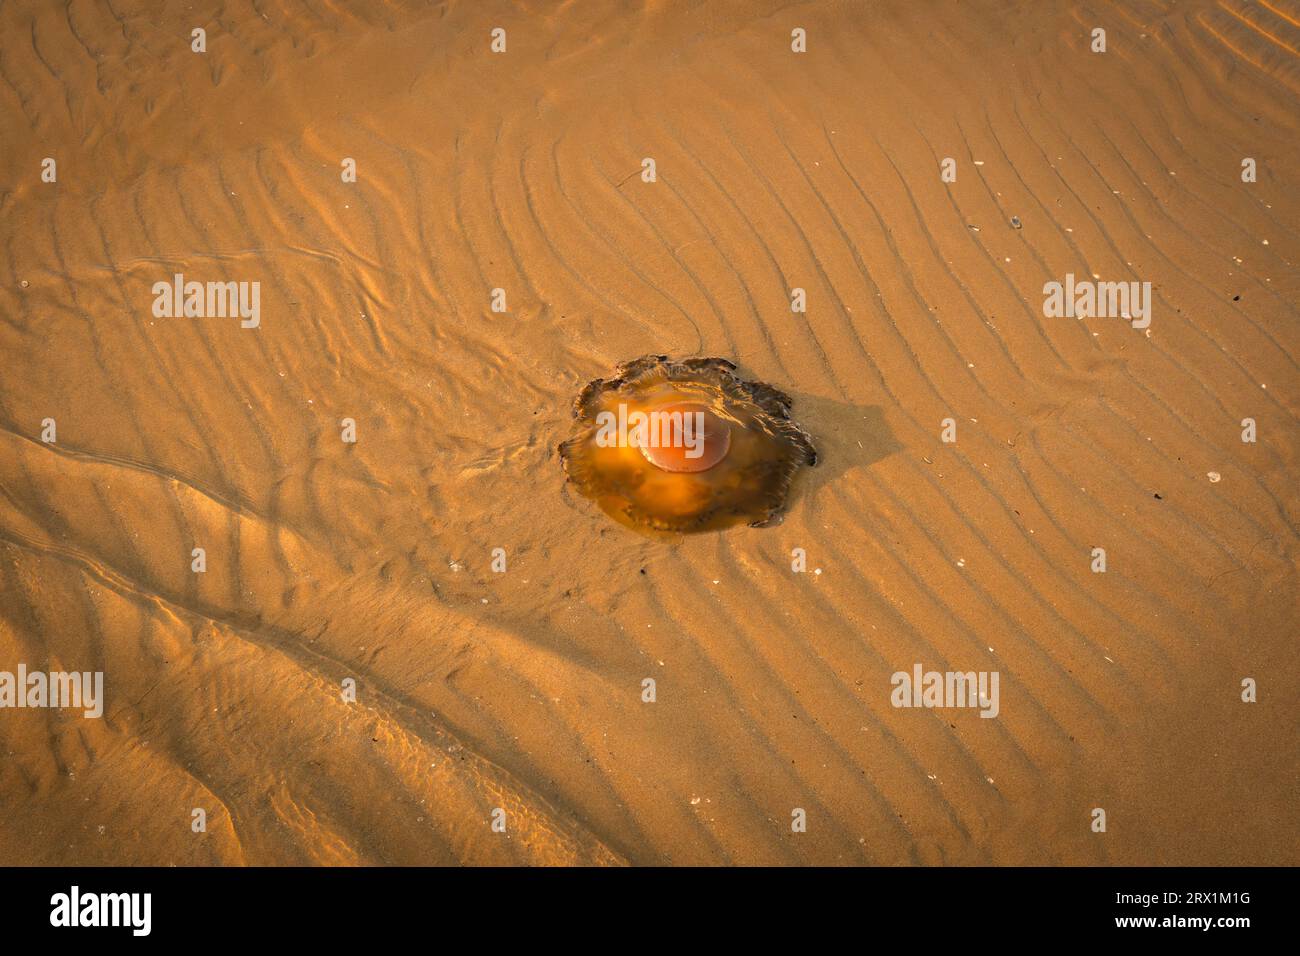 Jellyfish in the Adriatic Sea near the shore in shallow water. Stock Photo